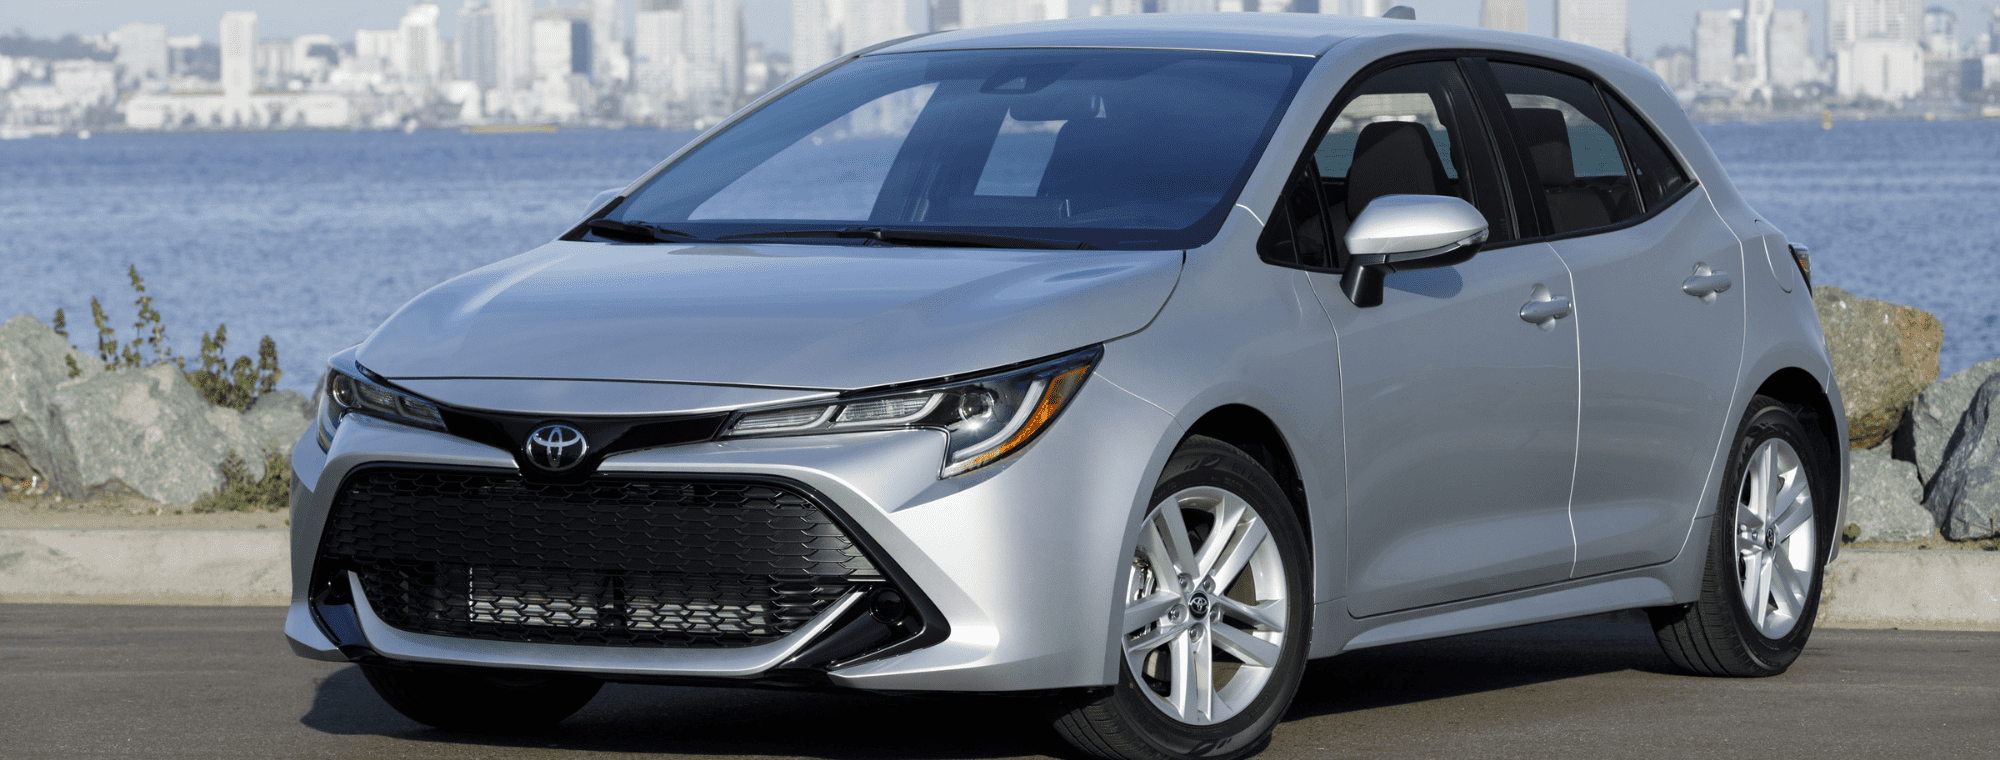 Pacific Toyota Corolla Hybrid Review